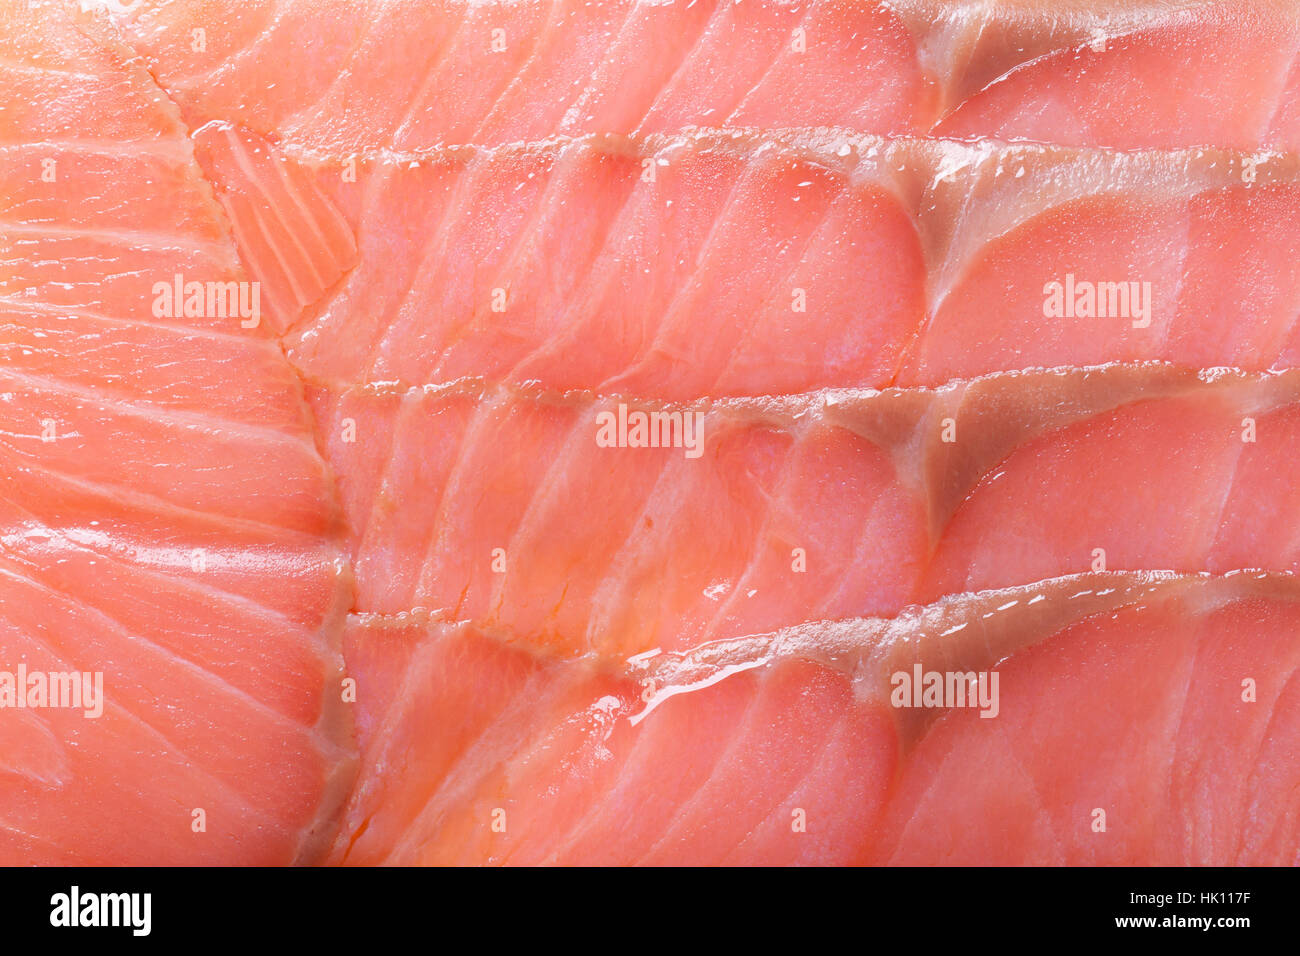 Tender Fish Meat, Cut into Thin Slices. Cold-smoked Chum Salmon Stock Image  - Image of siberian, market: 207601241